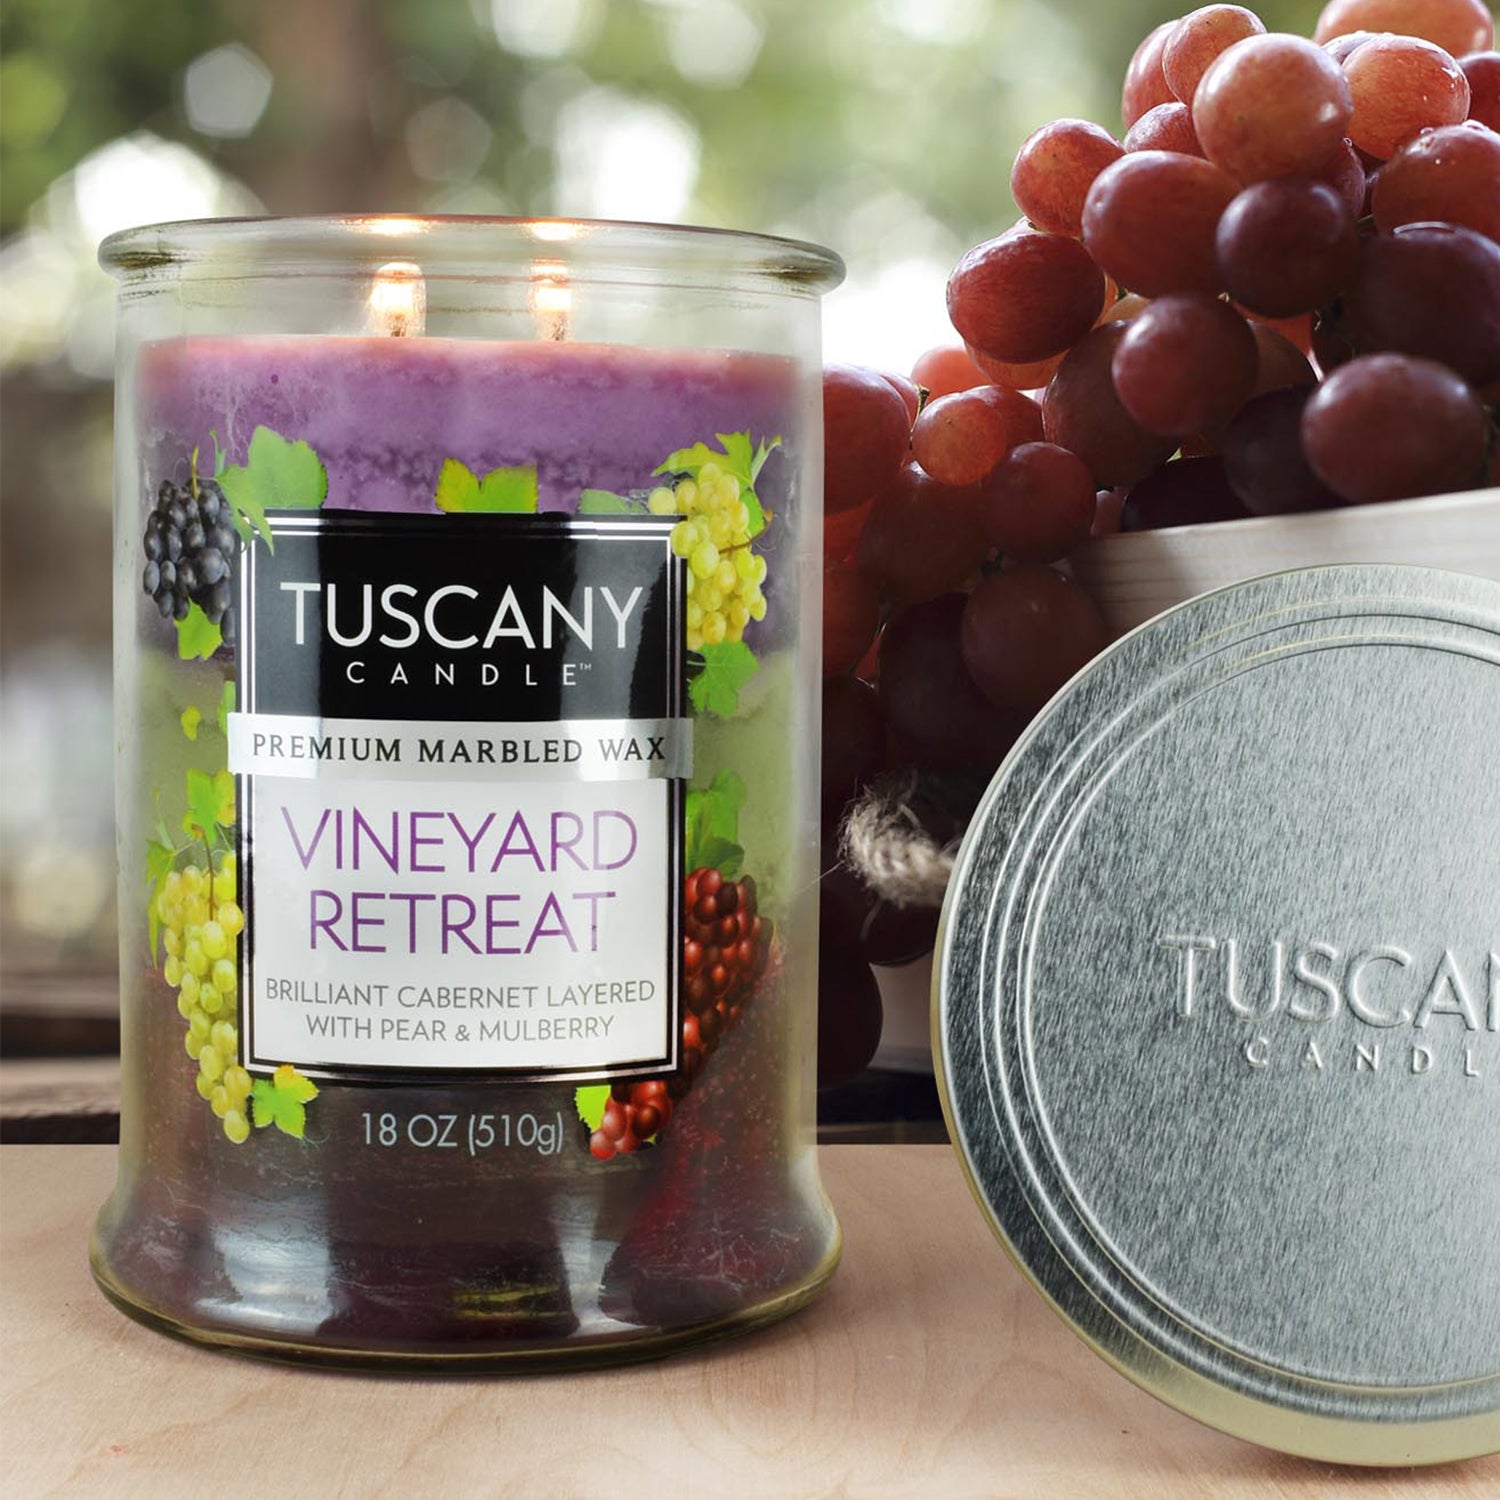 Tuscany Candle™ Sea & Sand Scented Triple Pour Jar Candle, 18 oz